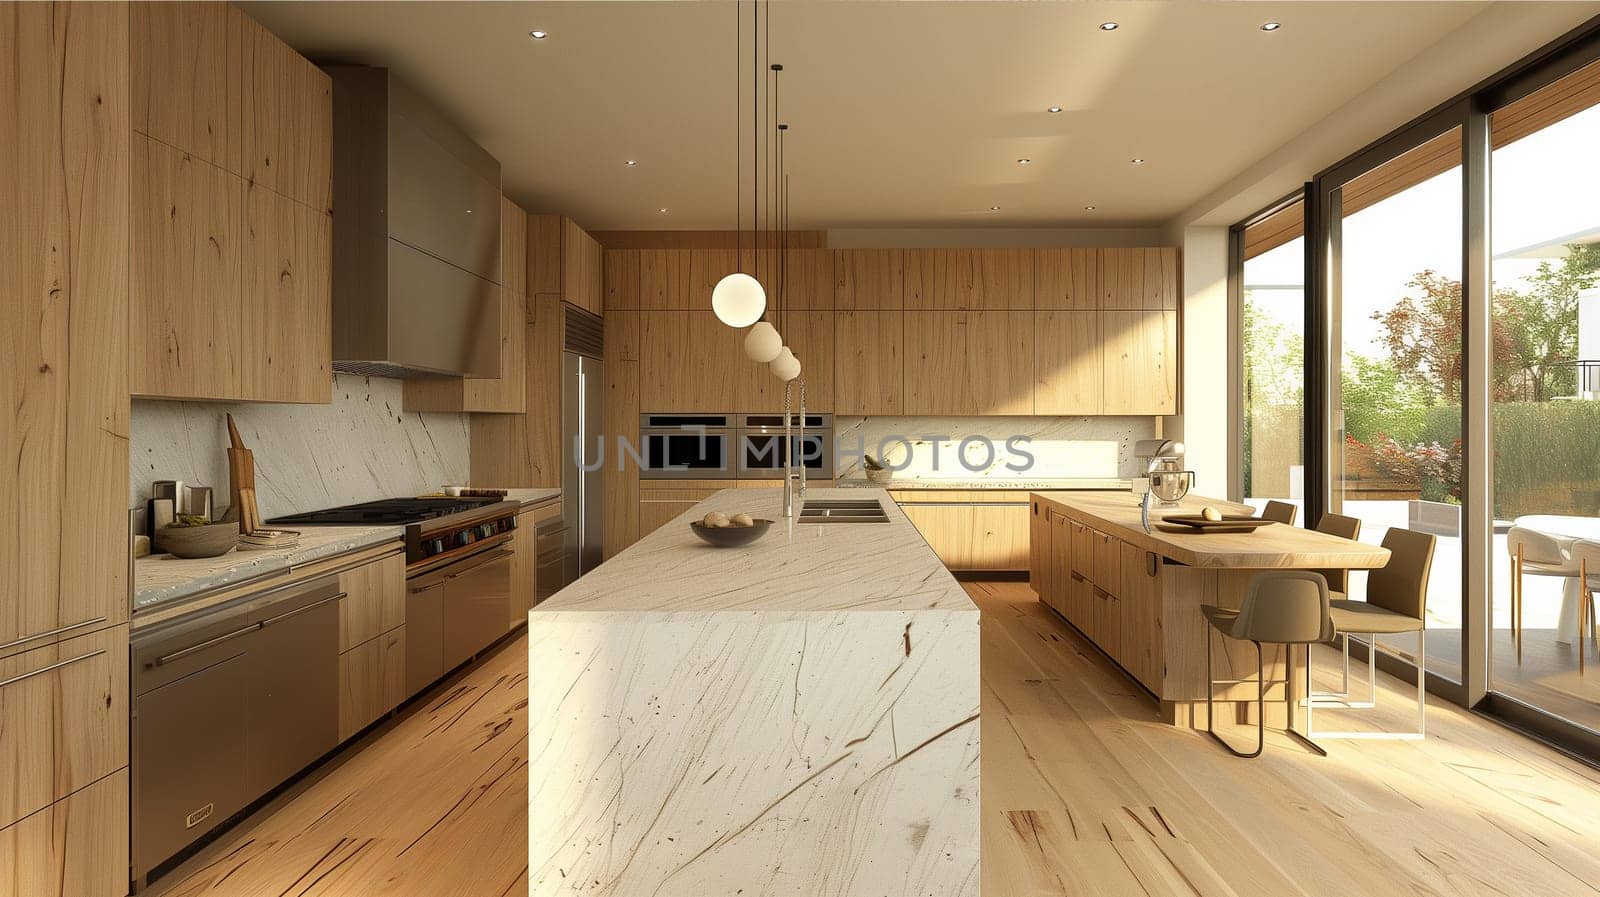 A kitchen featuring sleek marble countertops and warm wooden cabinets, creating a modern and elegant look.